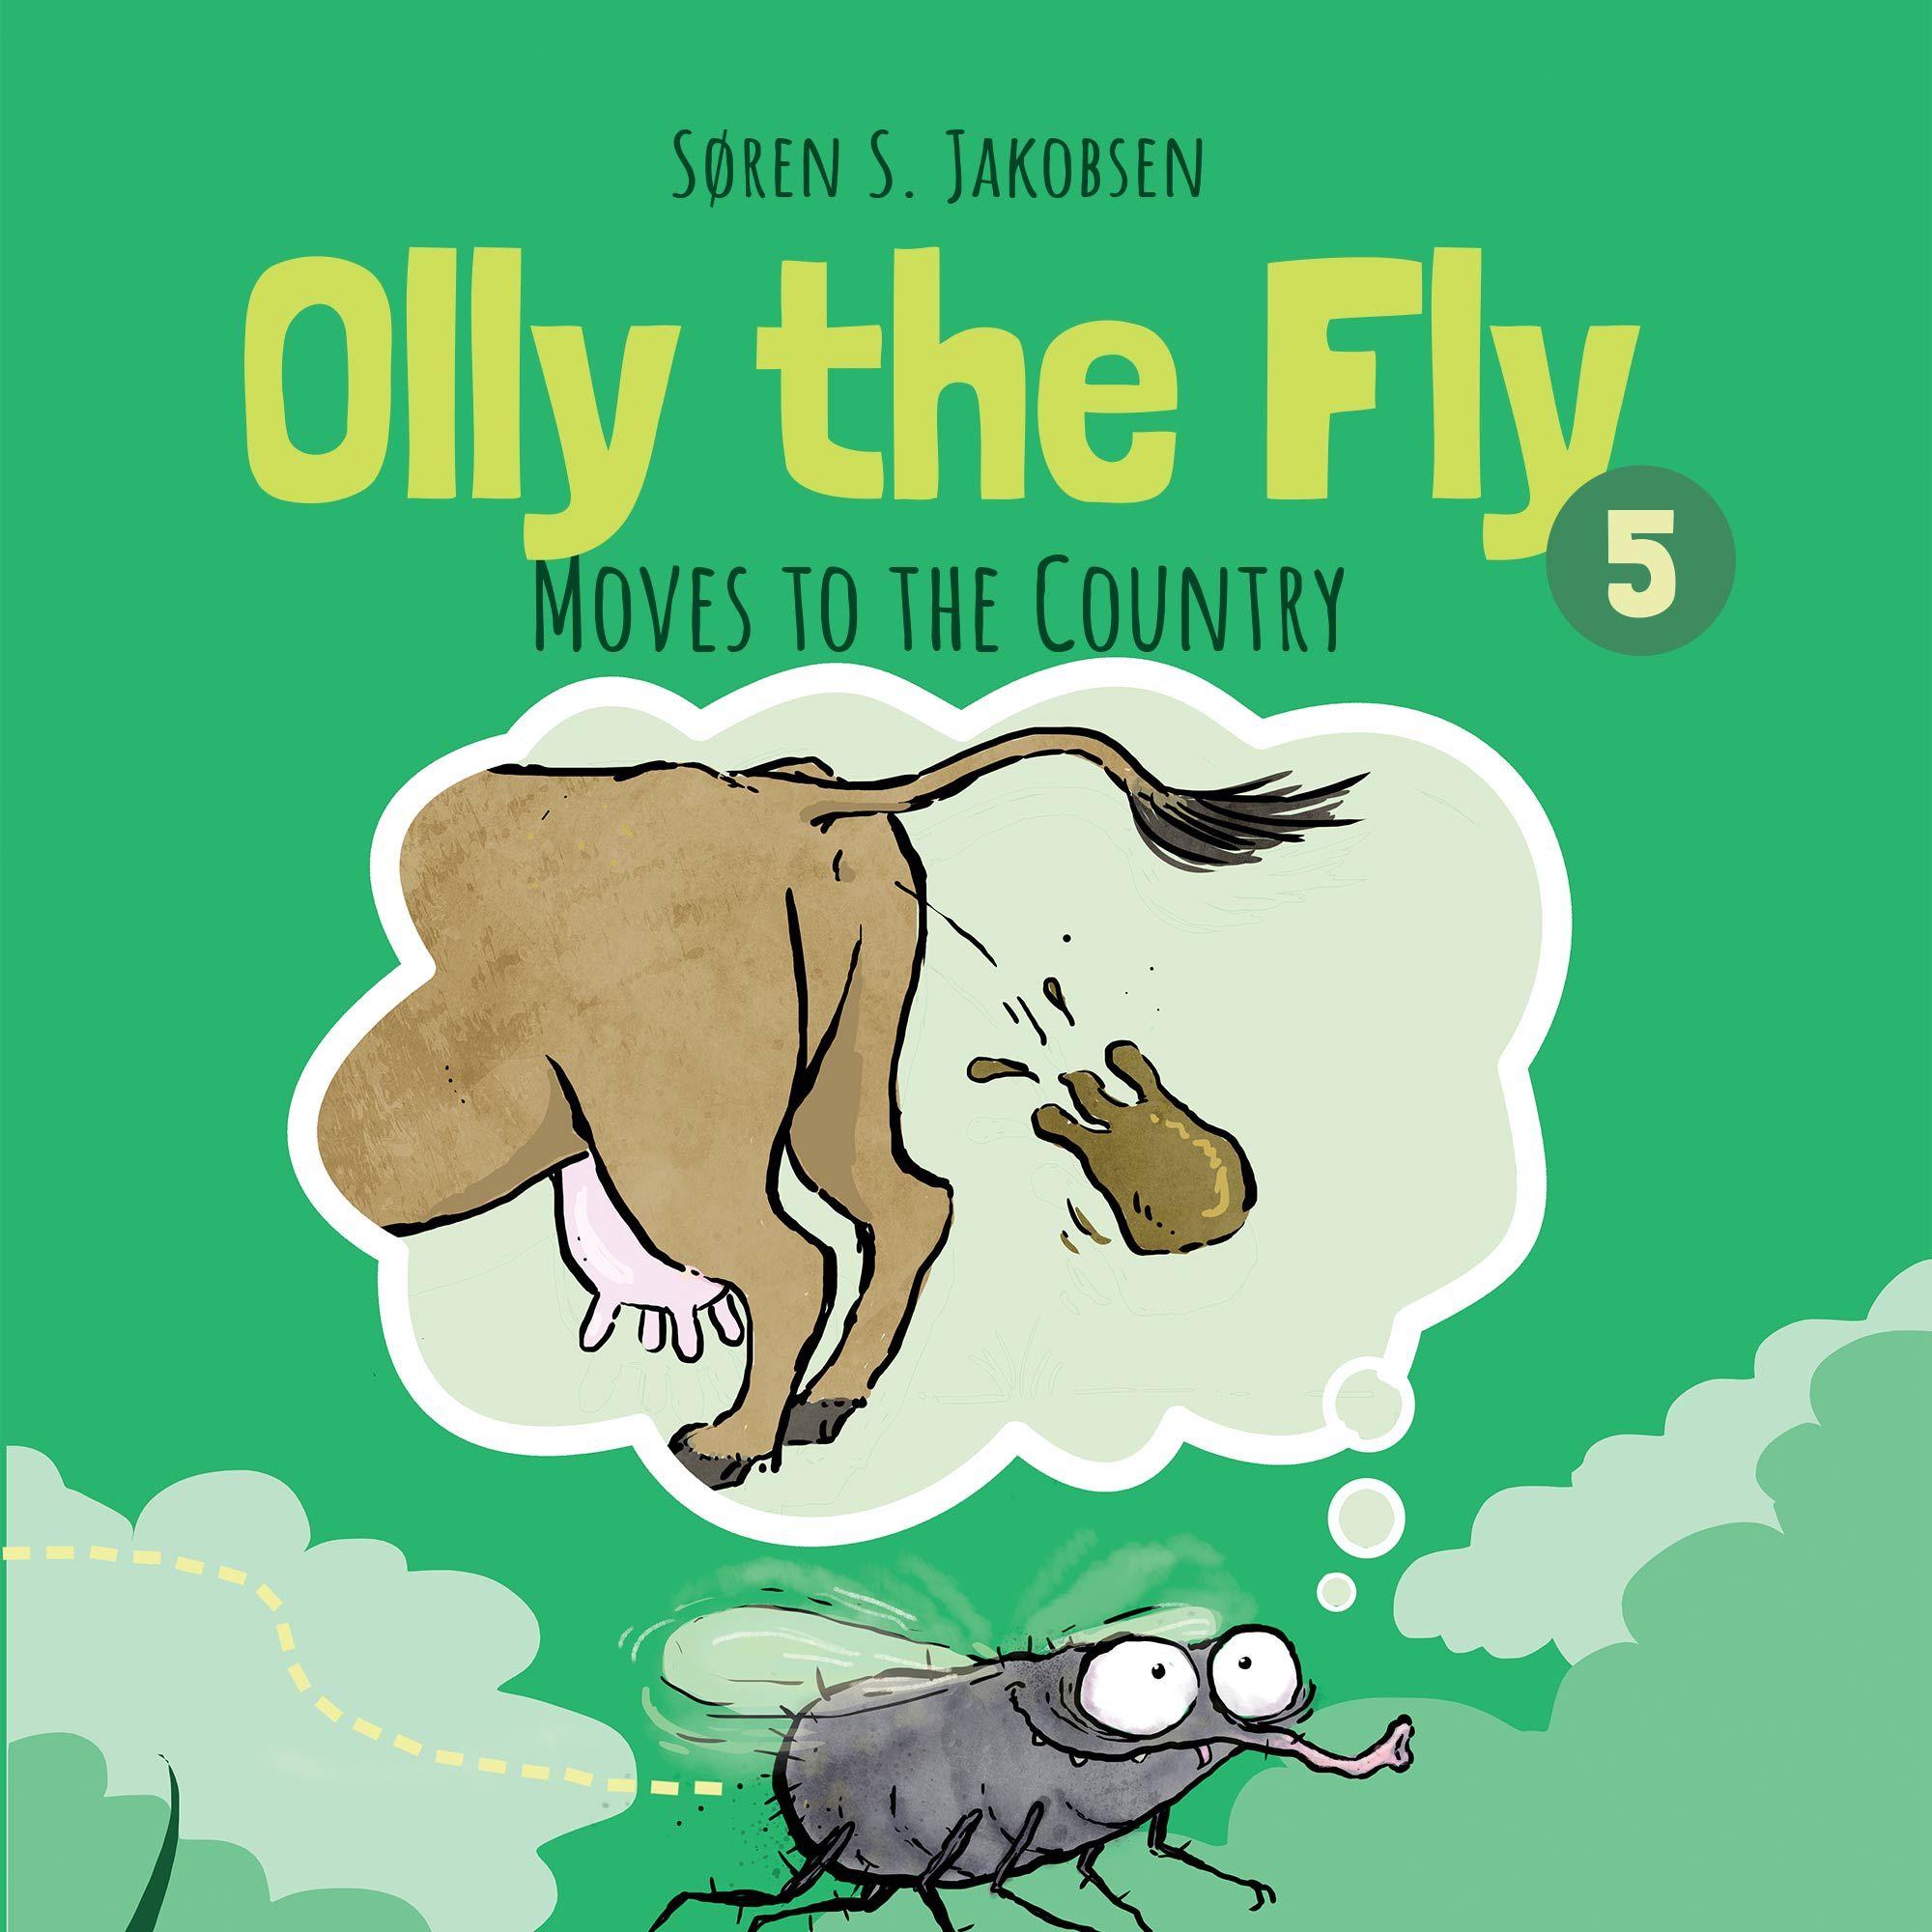 Olly the Fly #5: Olly the Fly Moves to the Country, lydbog af Søren S. Jakobsen